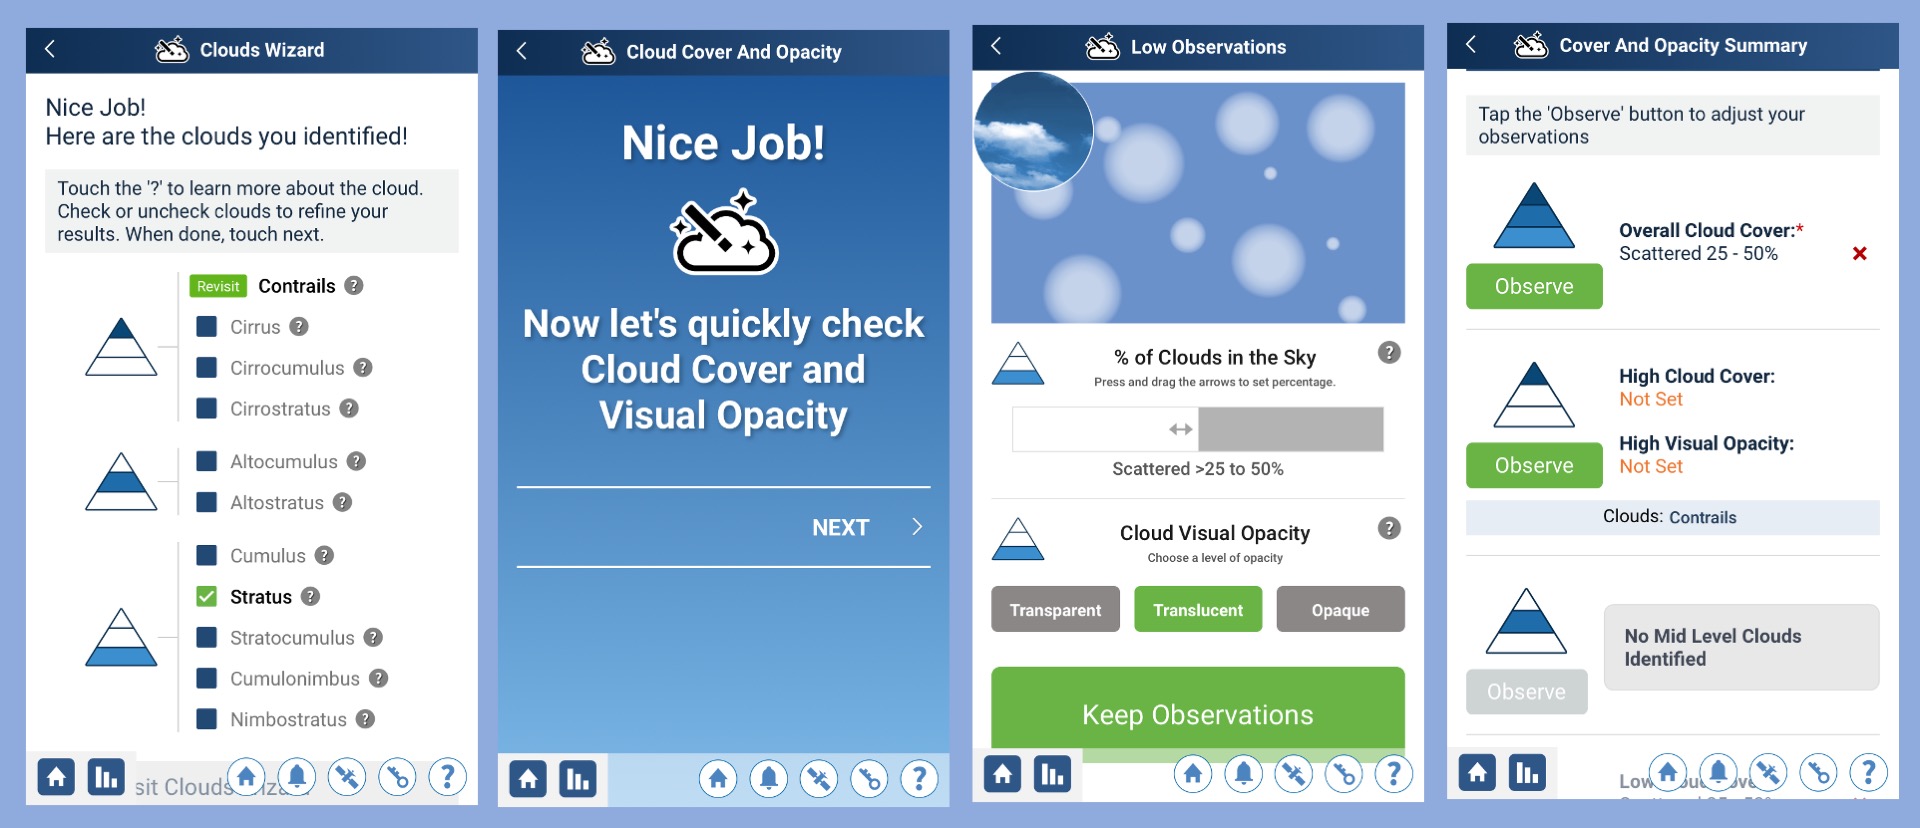 Screenshots showing how the wizard helps with cloud cover and visual opacity